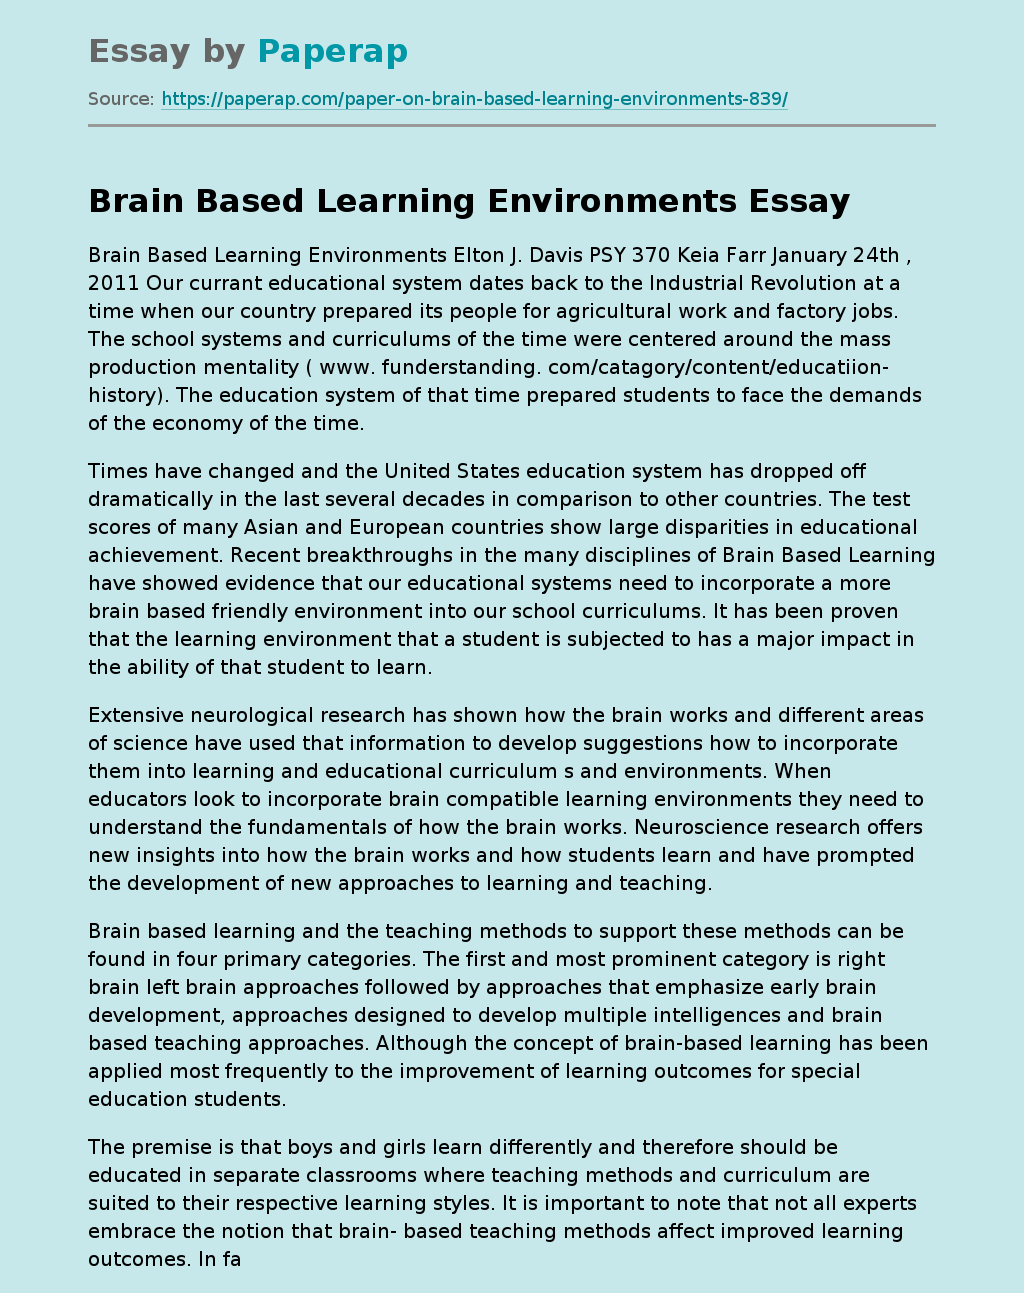 Brain Based Learning Environments